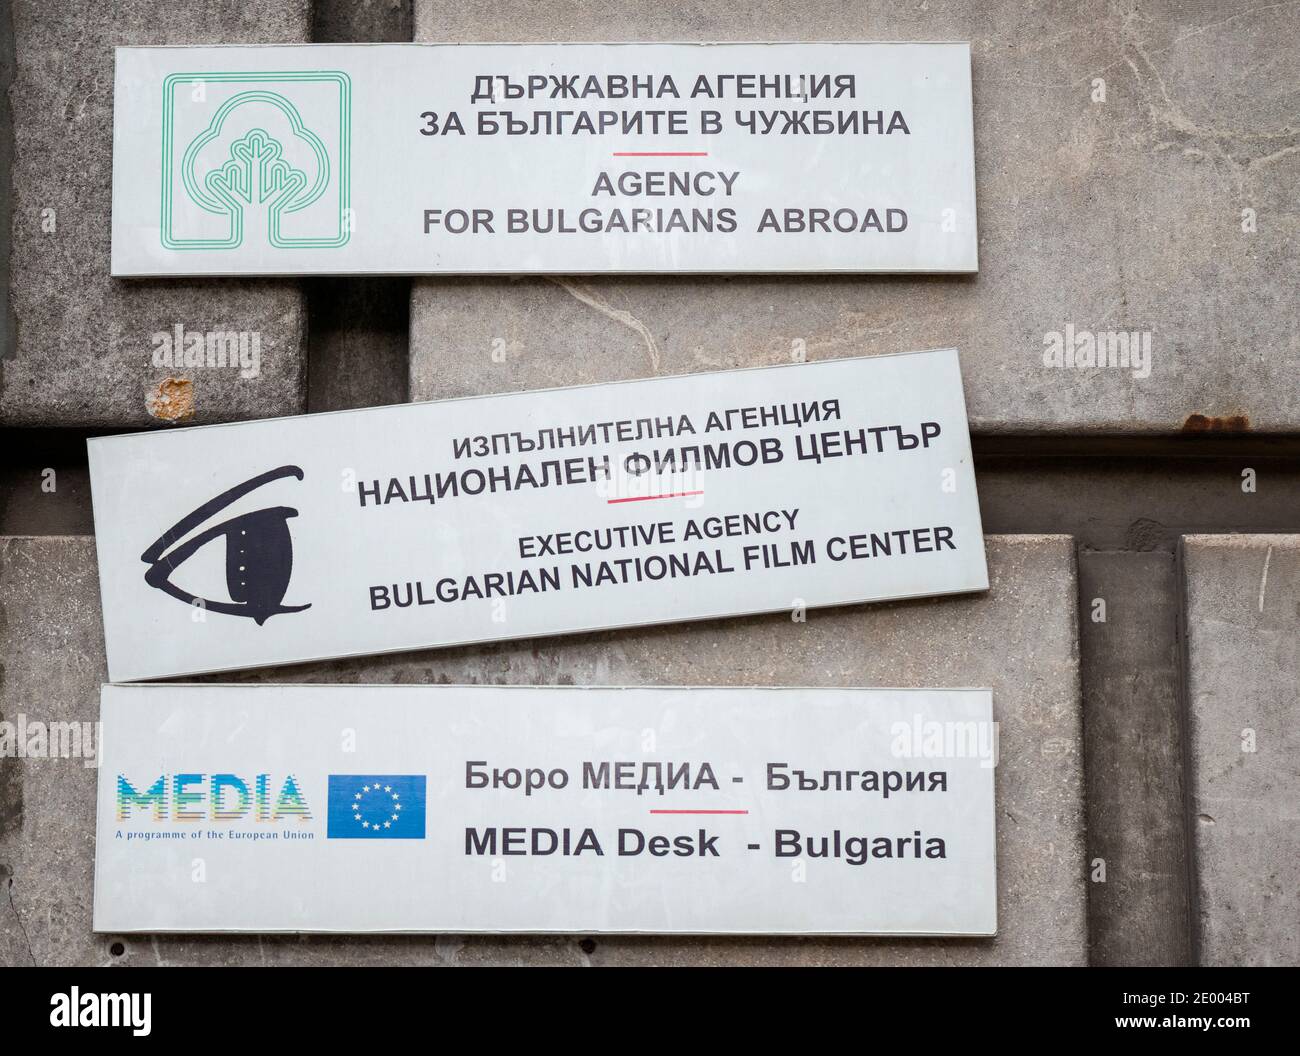 Various signs for the Agency for Bulgarians Abroad, Media Desk Bulgaria and the Bulgarian National Film Center in Sofia Bulgaria Eastern Europe EU Stock Photo